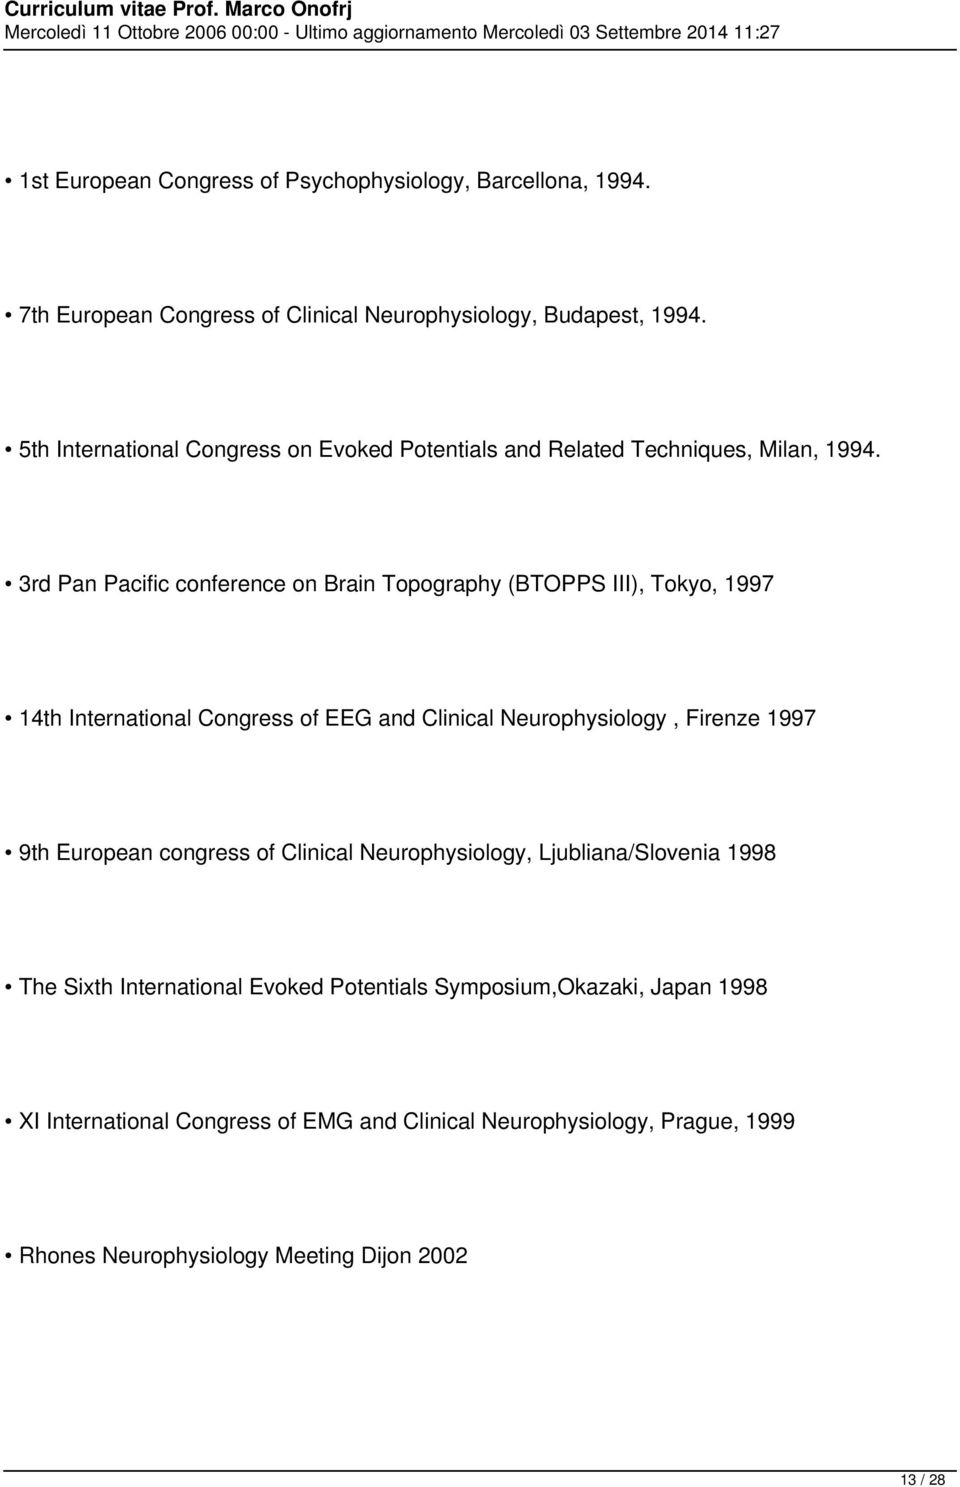 3rd Pan Pacific conference on Brain Topography (BTOPPS III), Tokyo, 1997 14th International Congress of EEG and Clinical Neurophysiology, Firenze 1997 9th